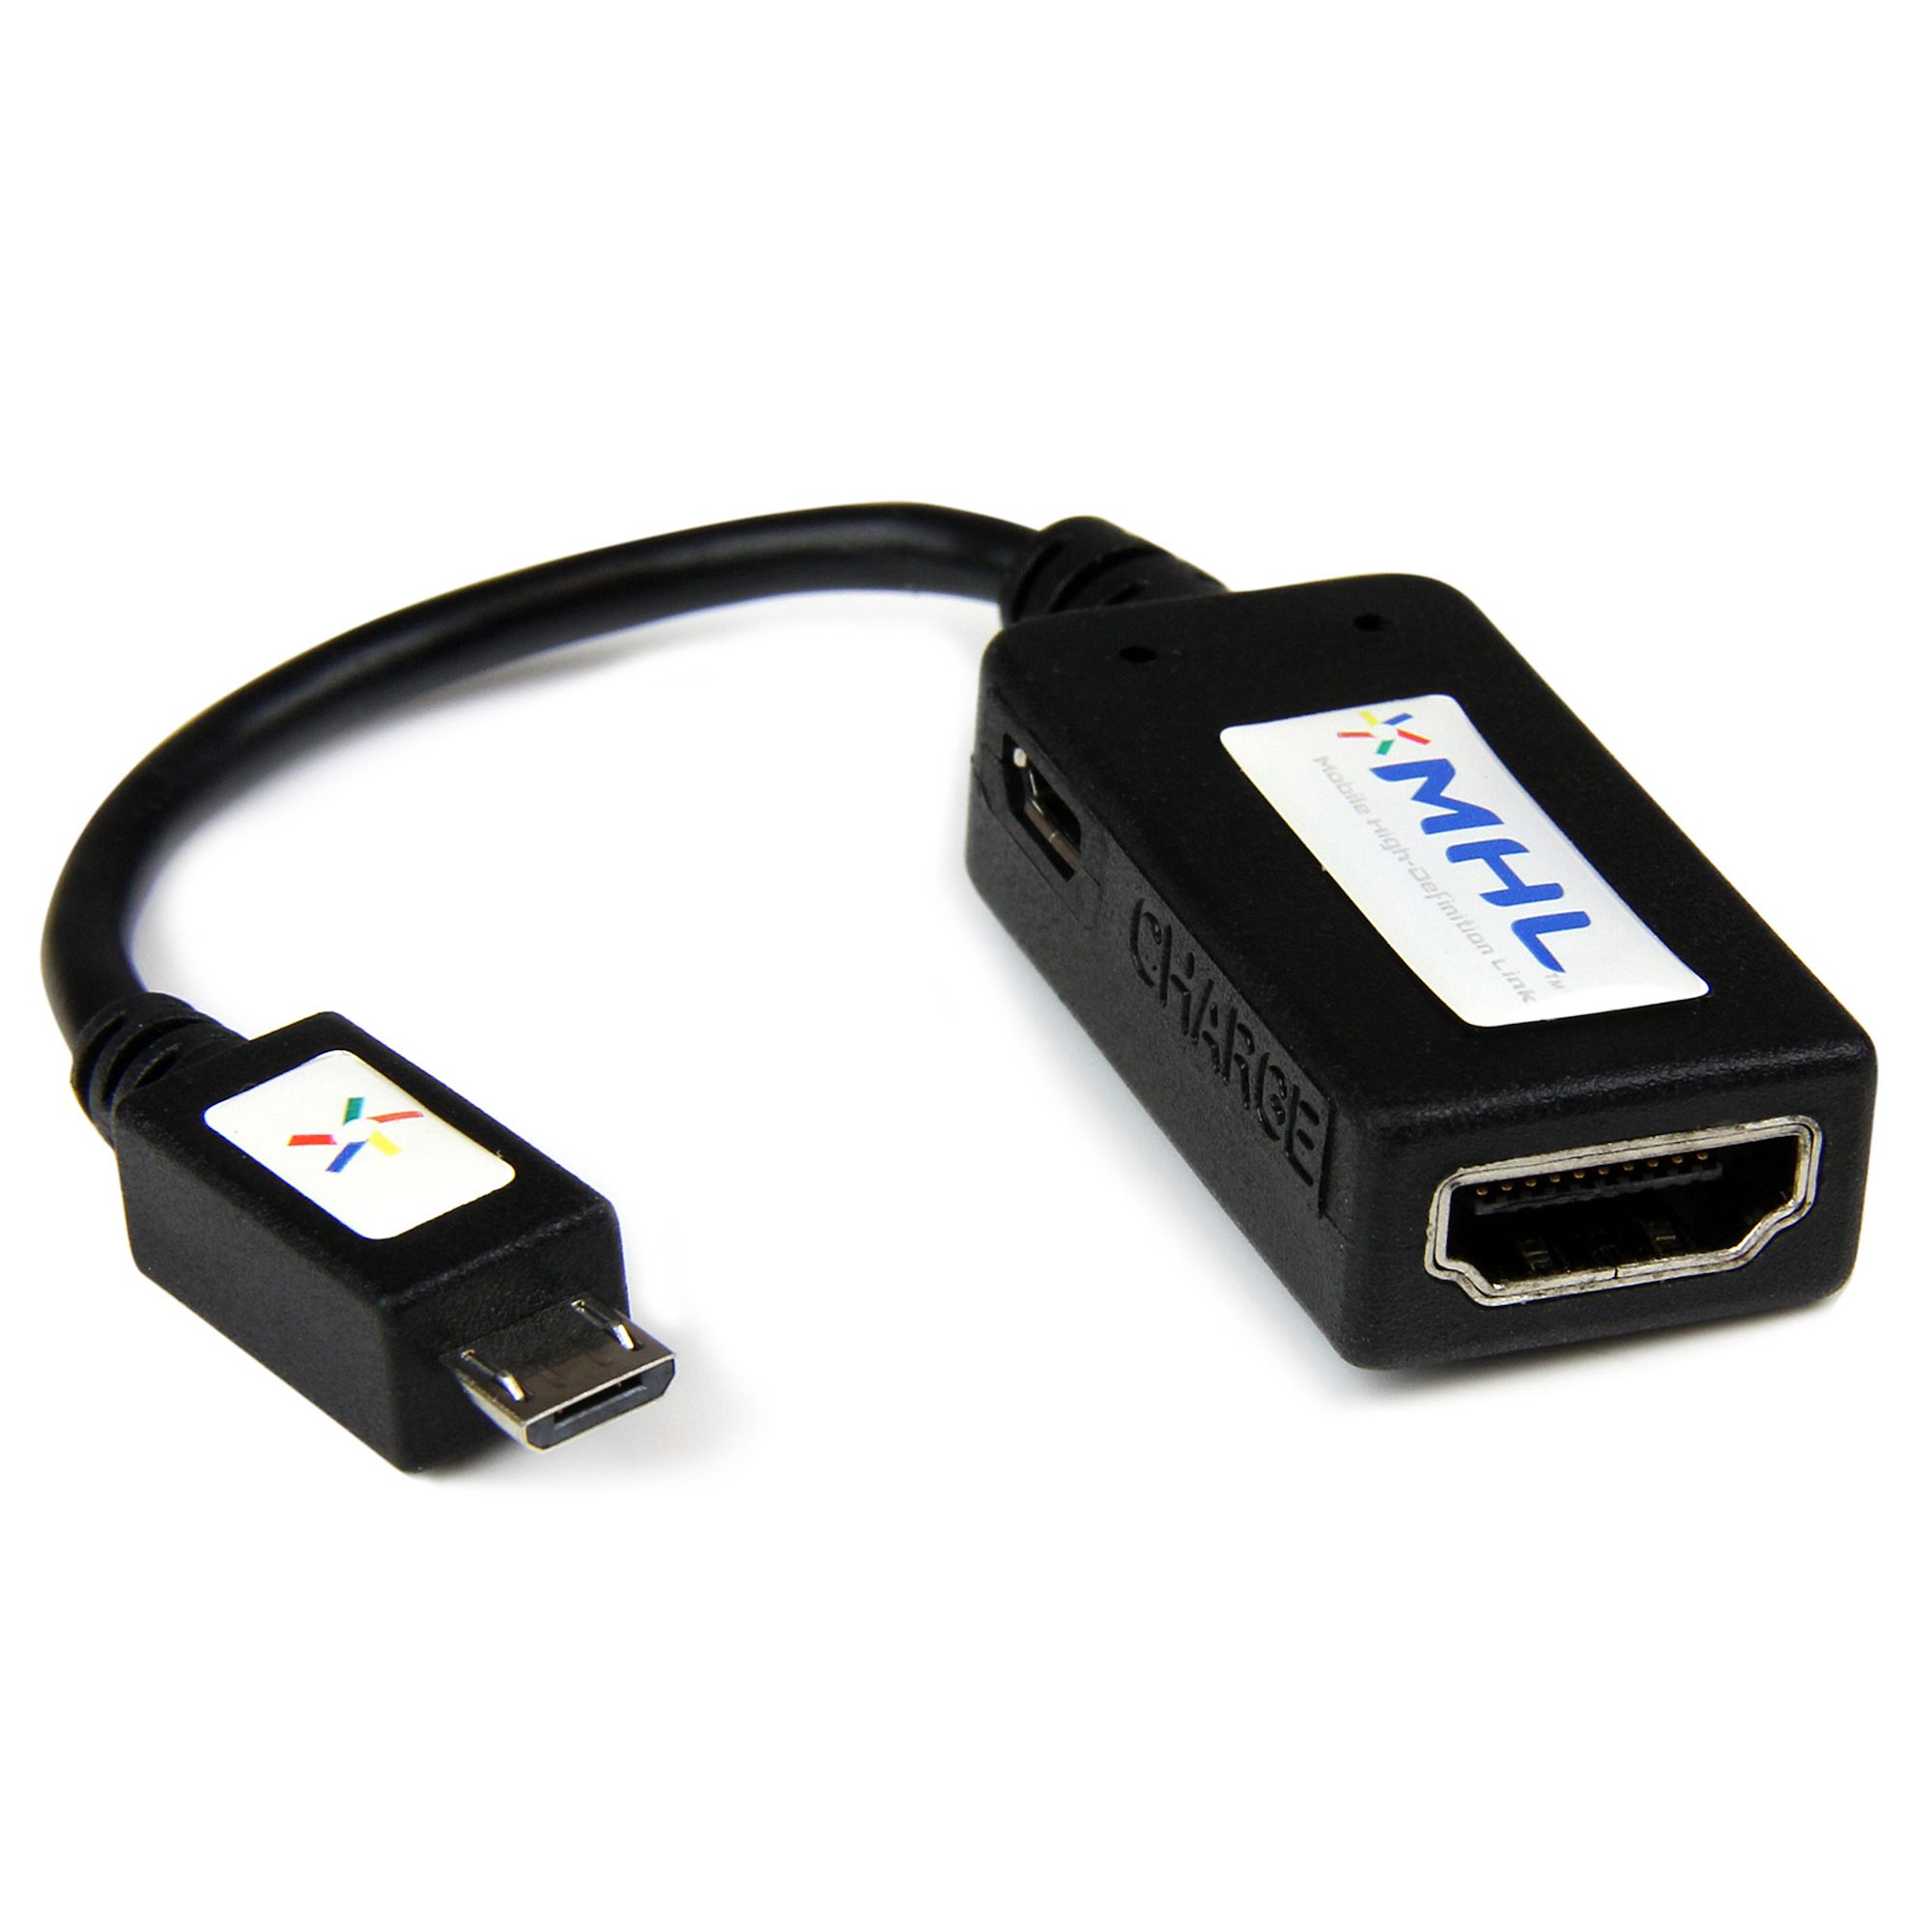 MHL Adapter Converter Micro USB to HDMI - Video Converters